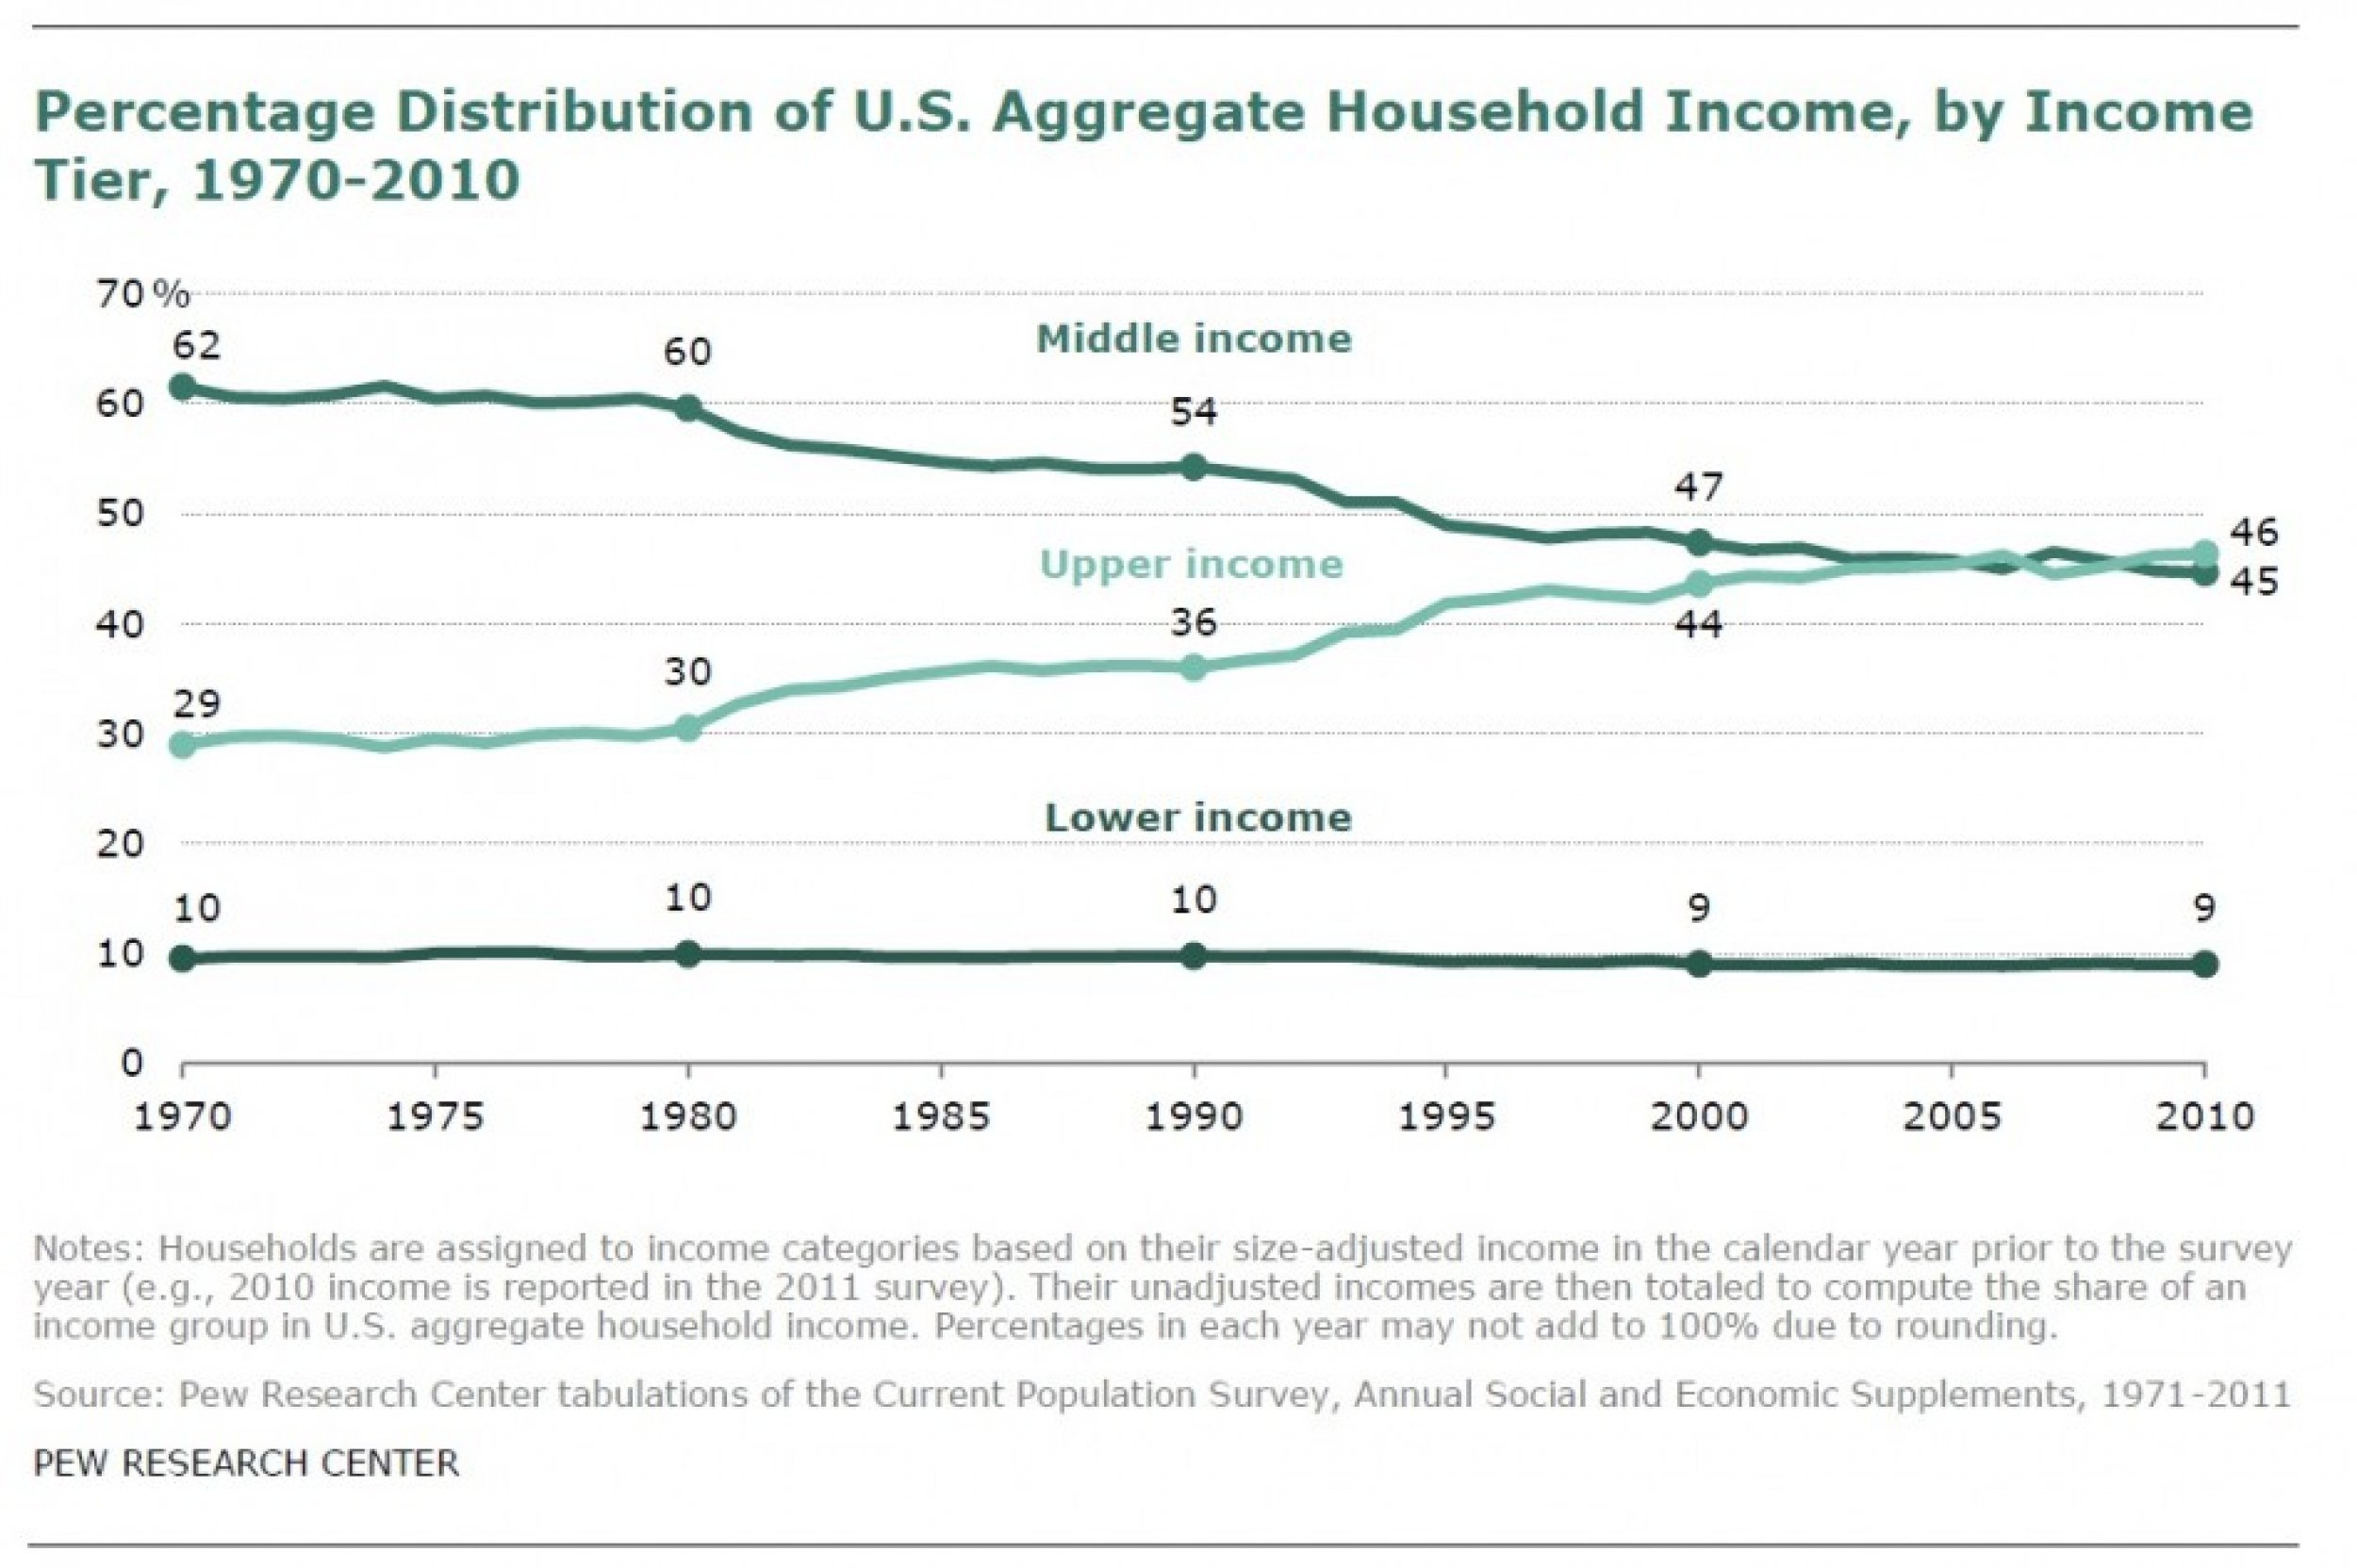 The middle class seems to have plenty to complain about. Their incomes share as part of the nations total sum has been steadily declining as the rich have become richer.